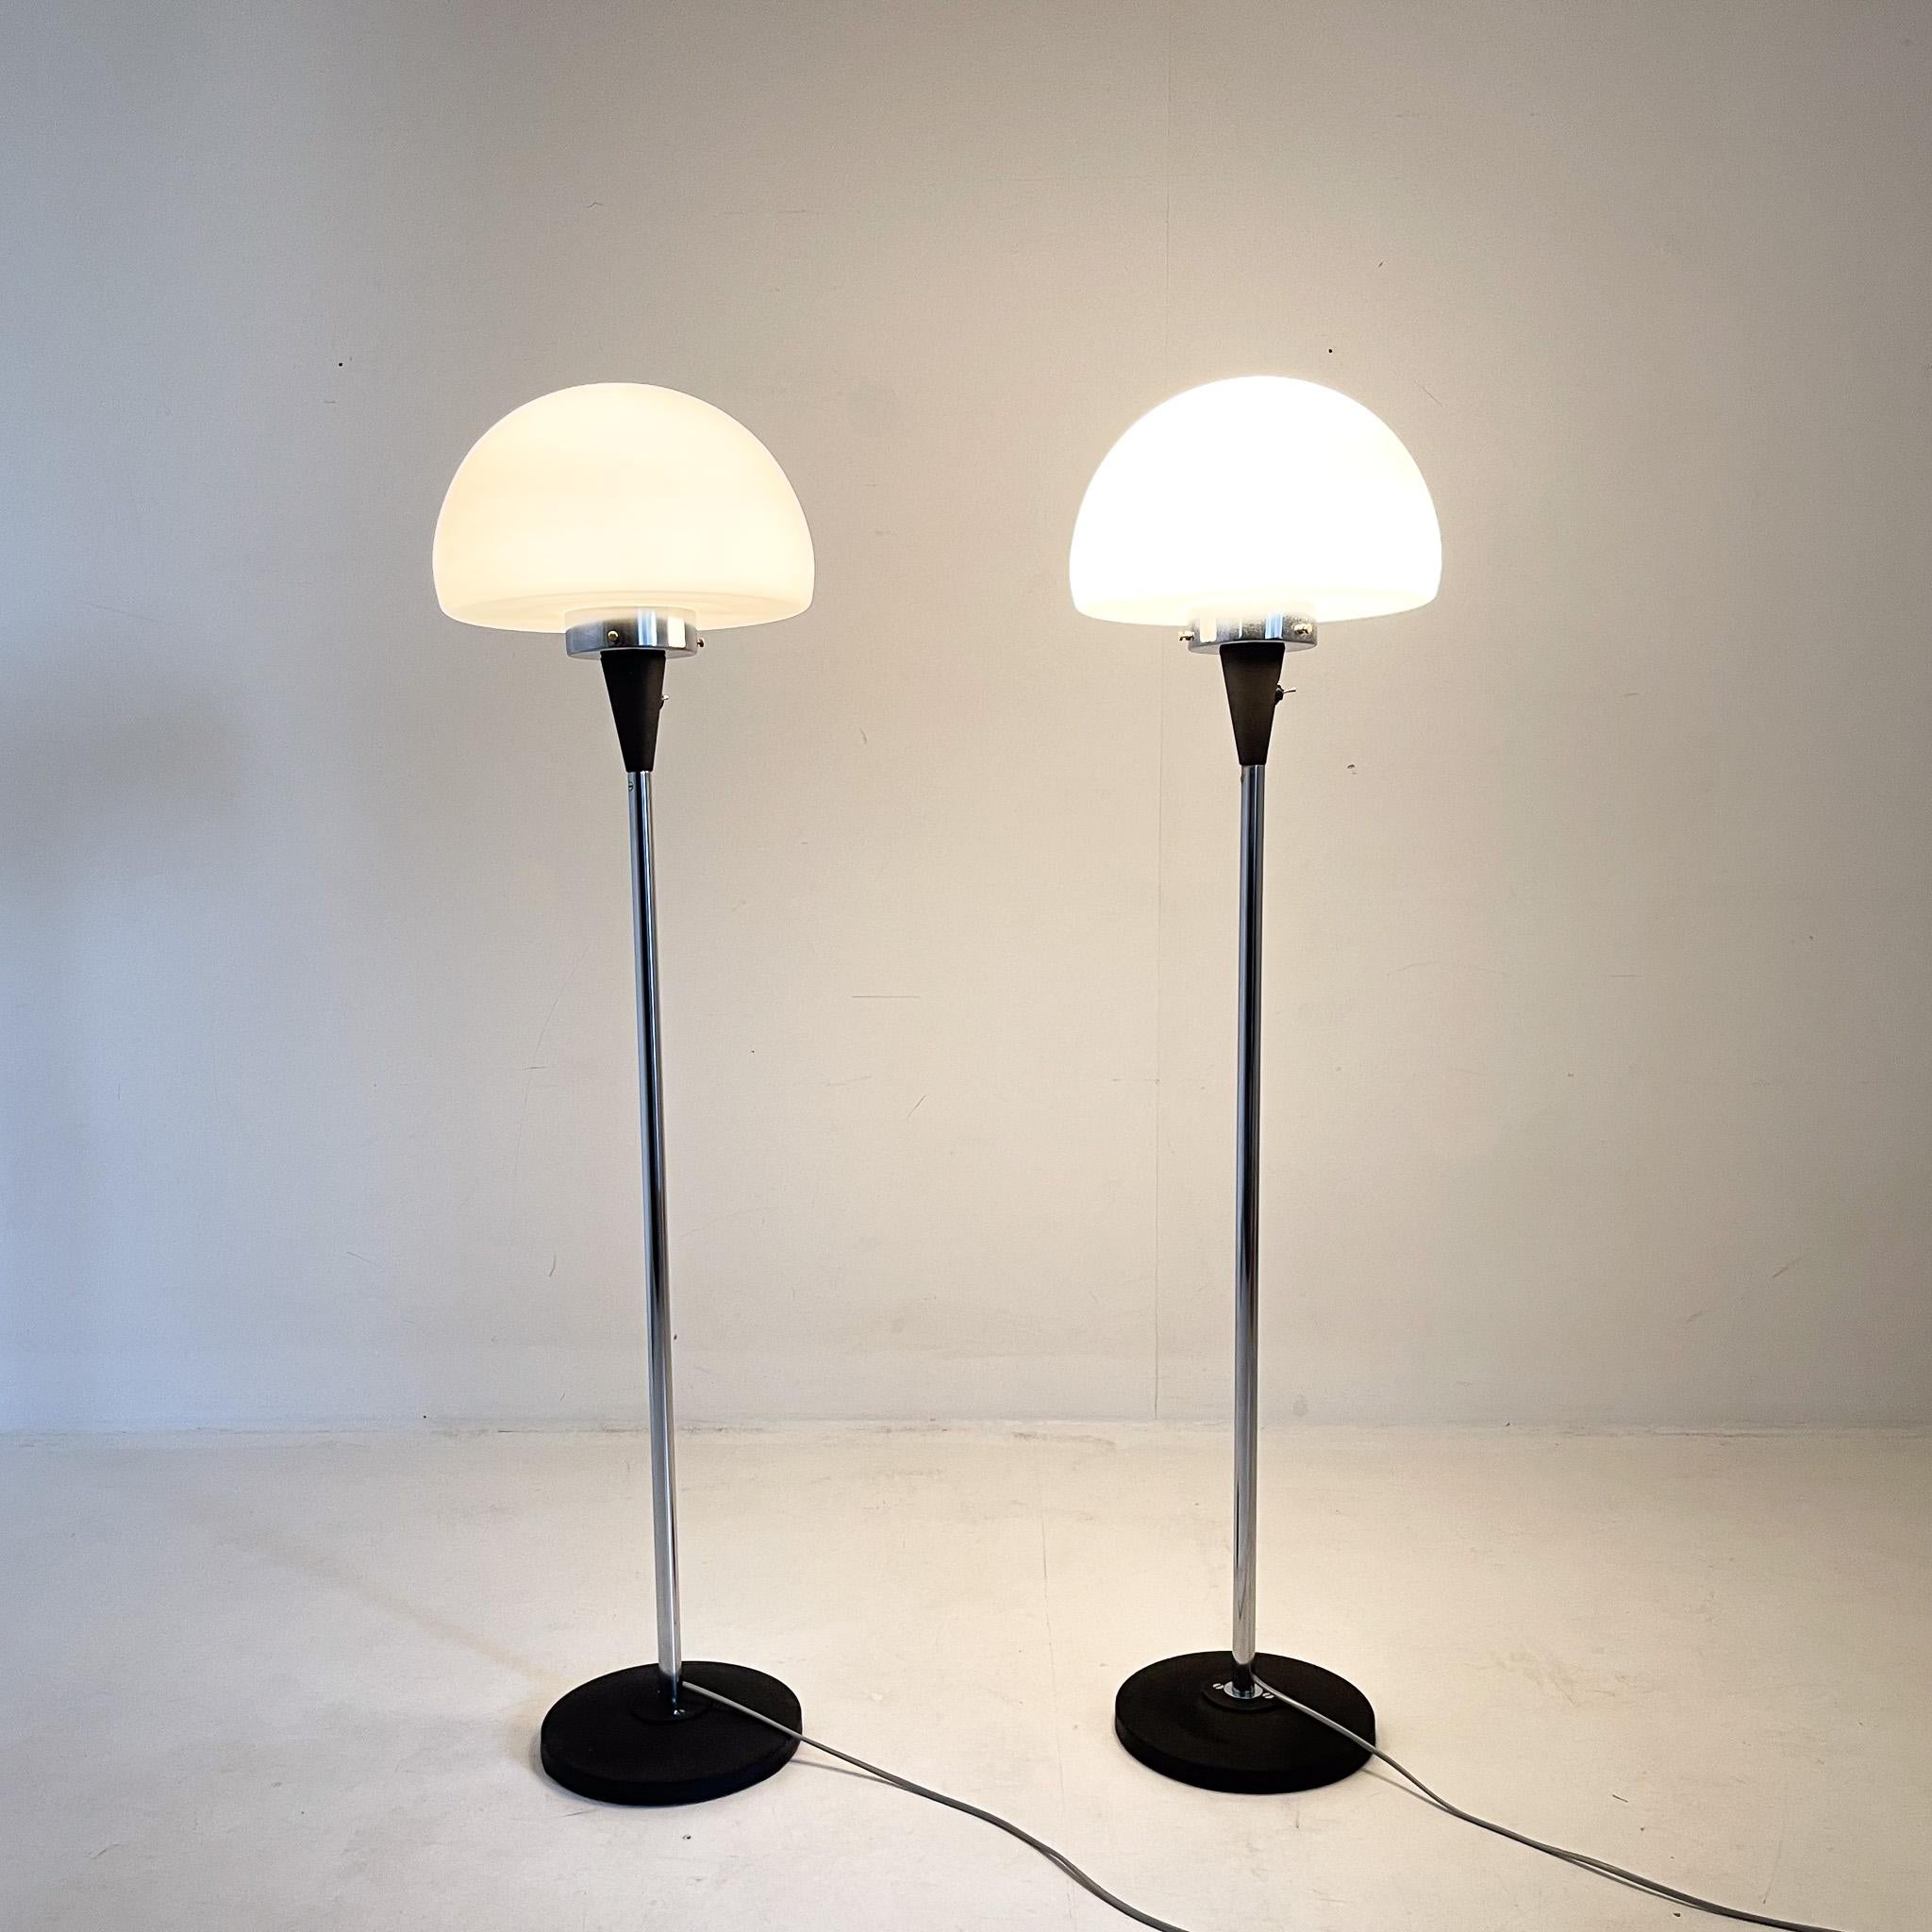 Pair of Two Floor Lamps by Jaroslav Bejvl for Lidokov, 1960s For Sale 3